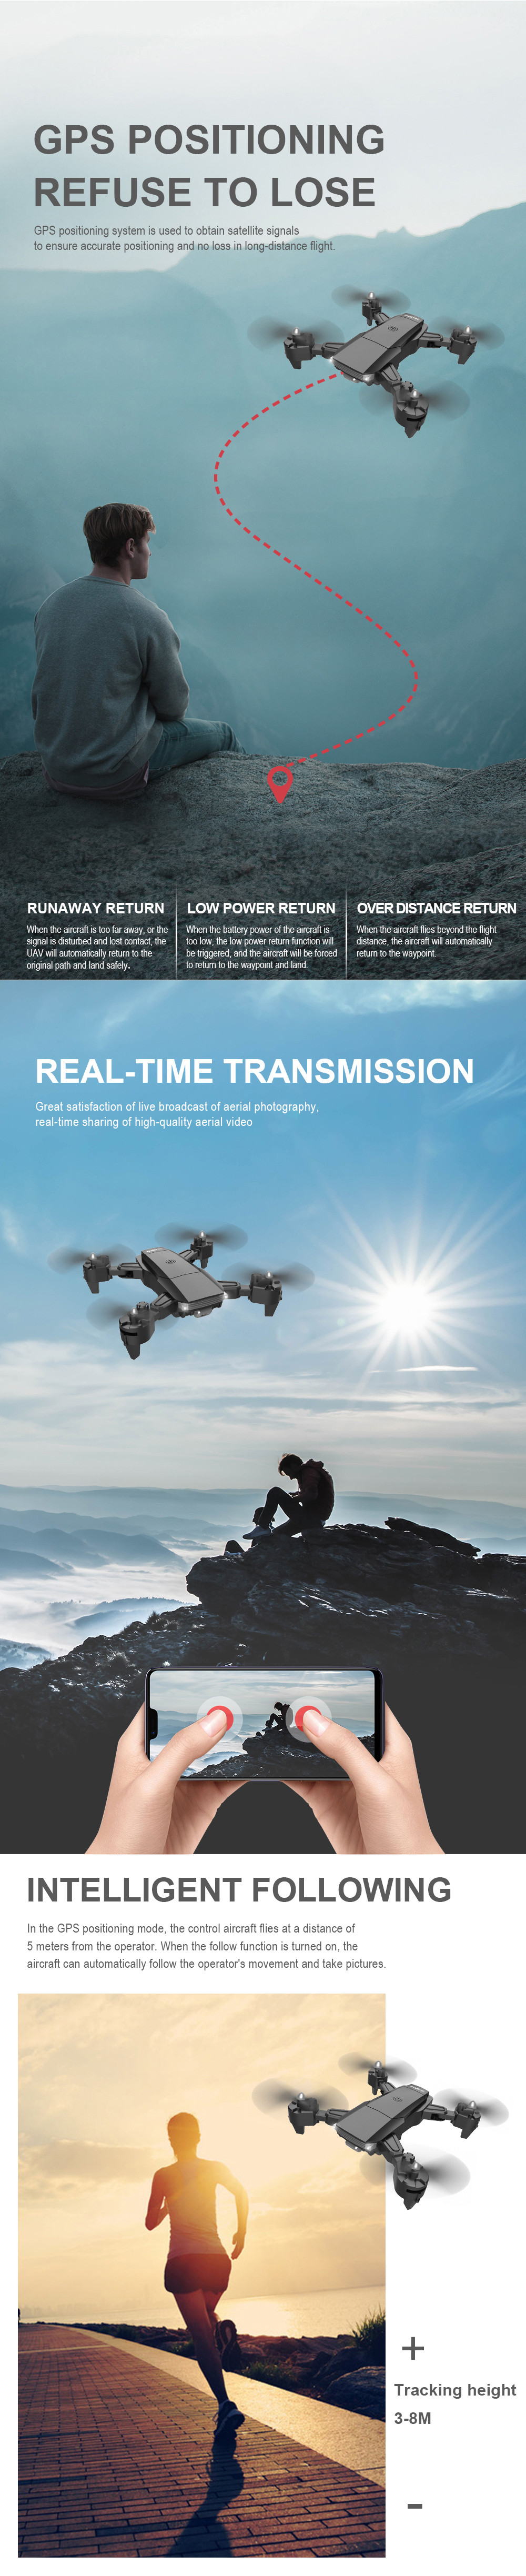 DH600S-GPS-5G-WiFi-FPV-With-4K-HD-Camera-20mins-Flight-Time-Follow-Me-Mode-Foldable-RC-Quadcopter-Dr-1880209-2